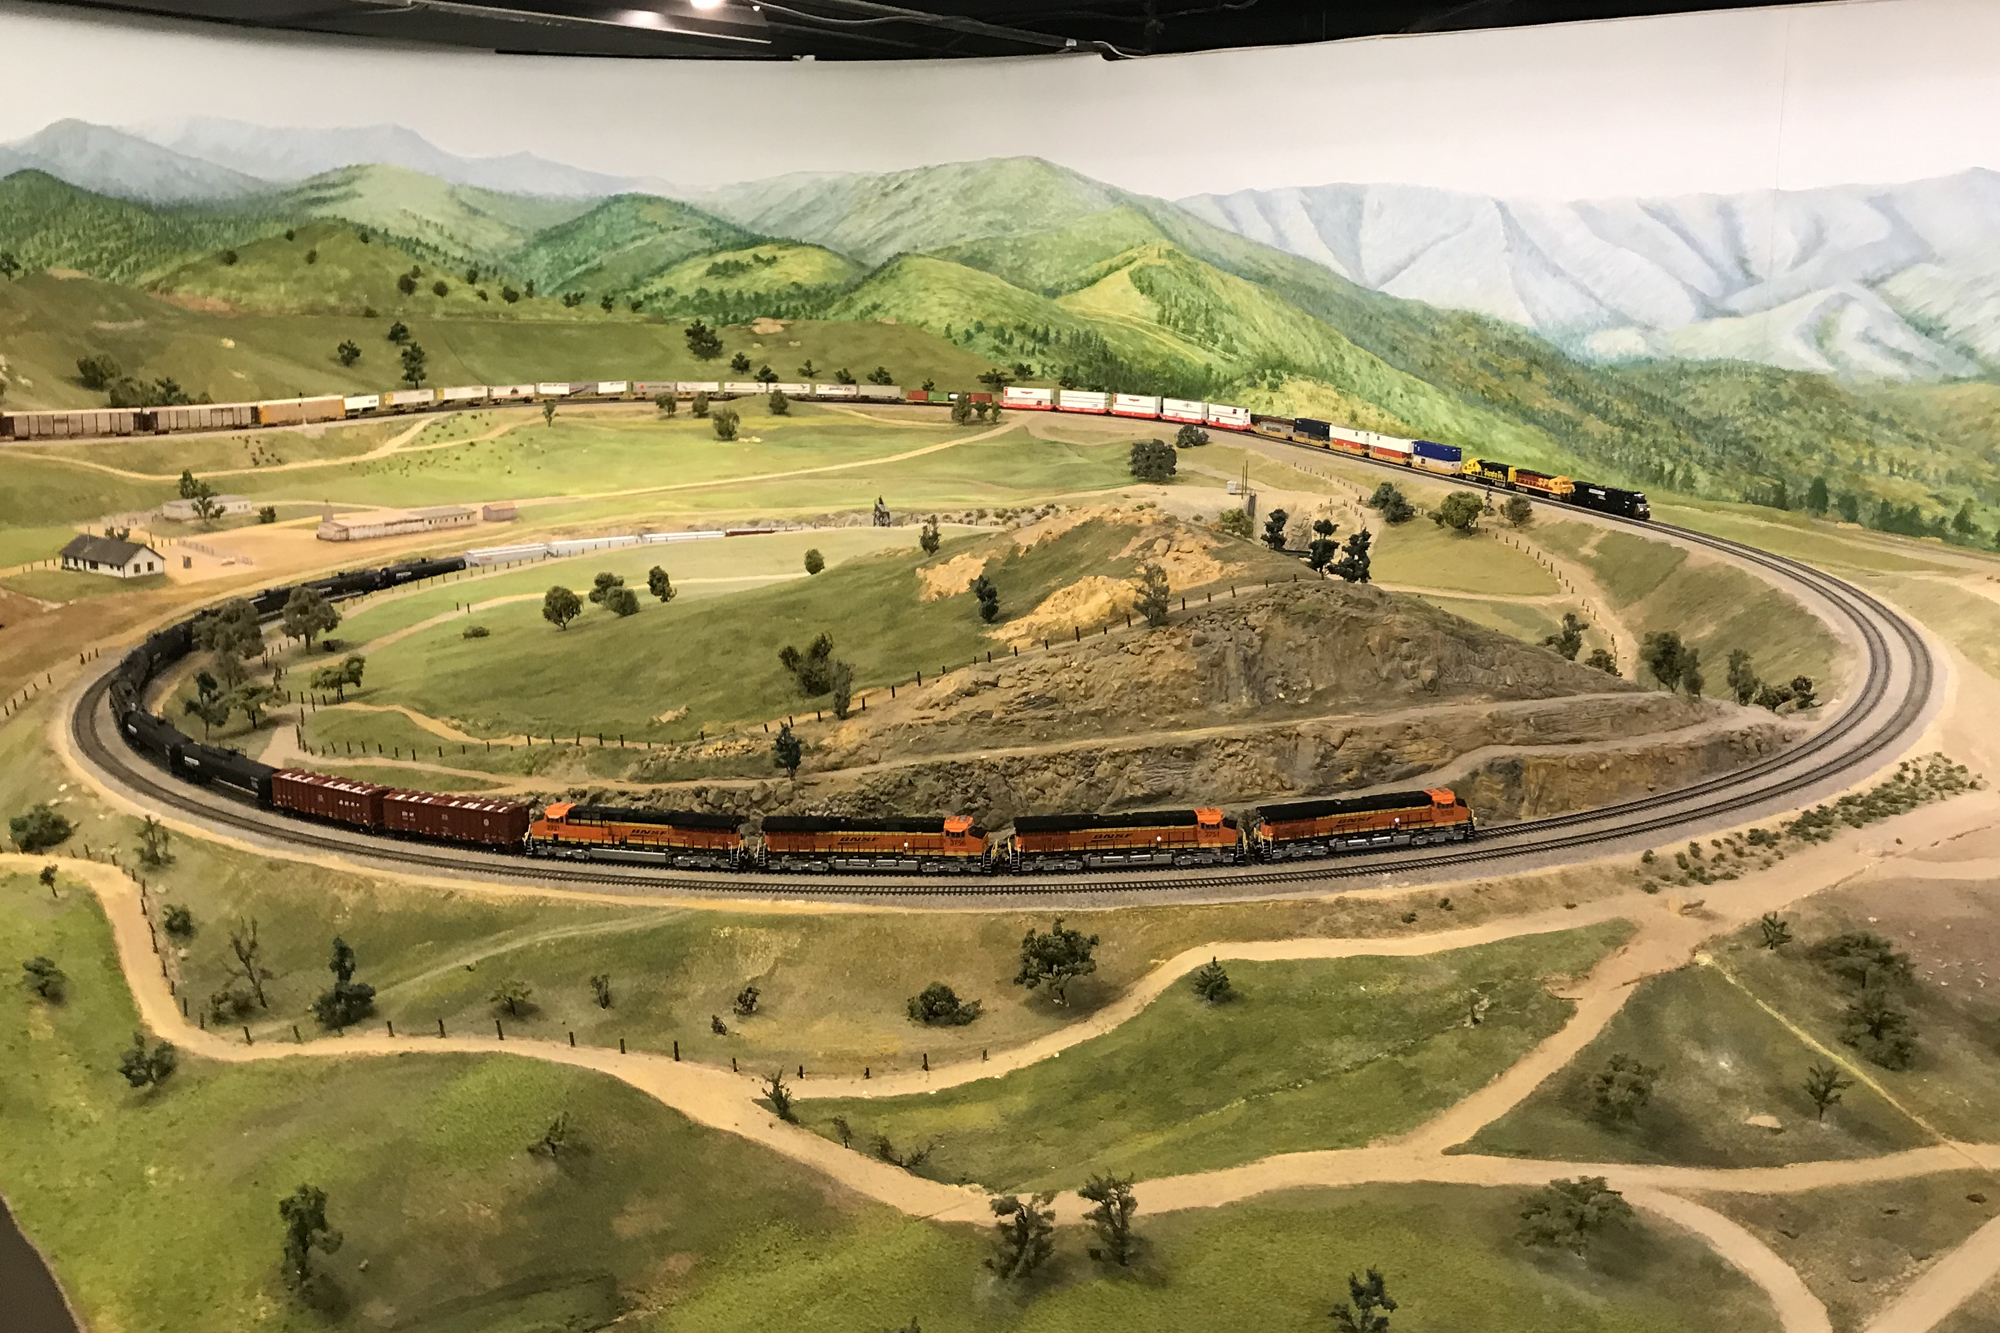 La Mesa Model Railroad Club with two trains passing each other on the Tehachapi Loop.